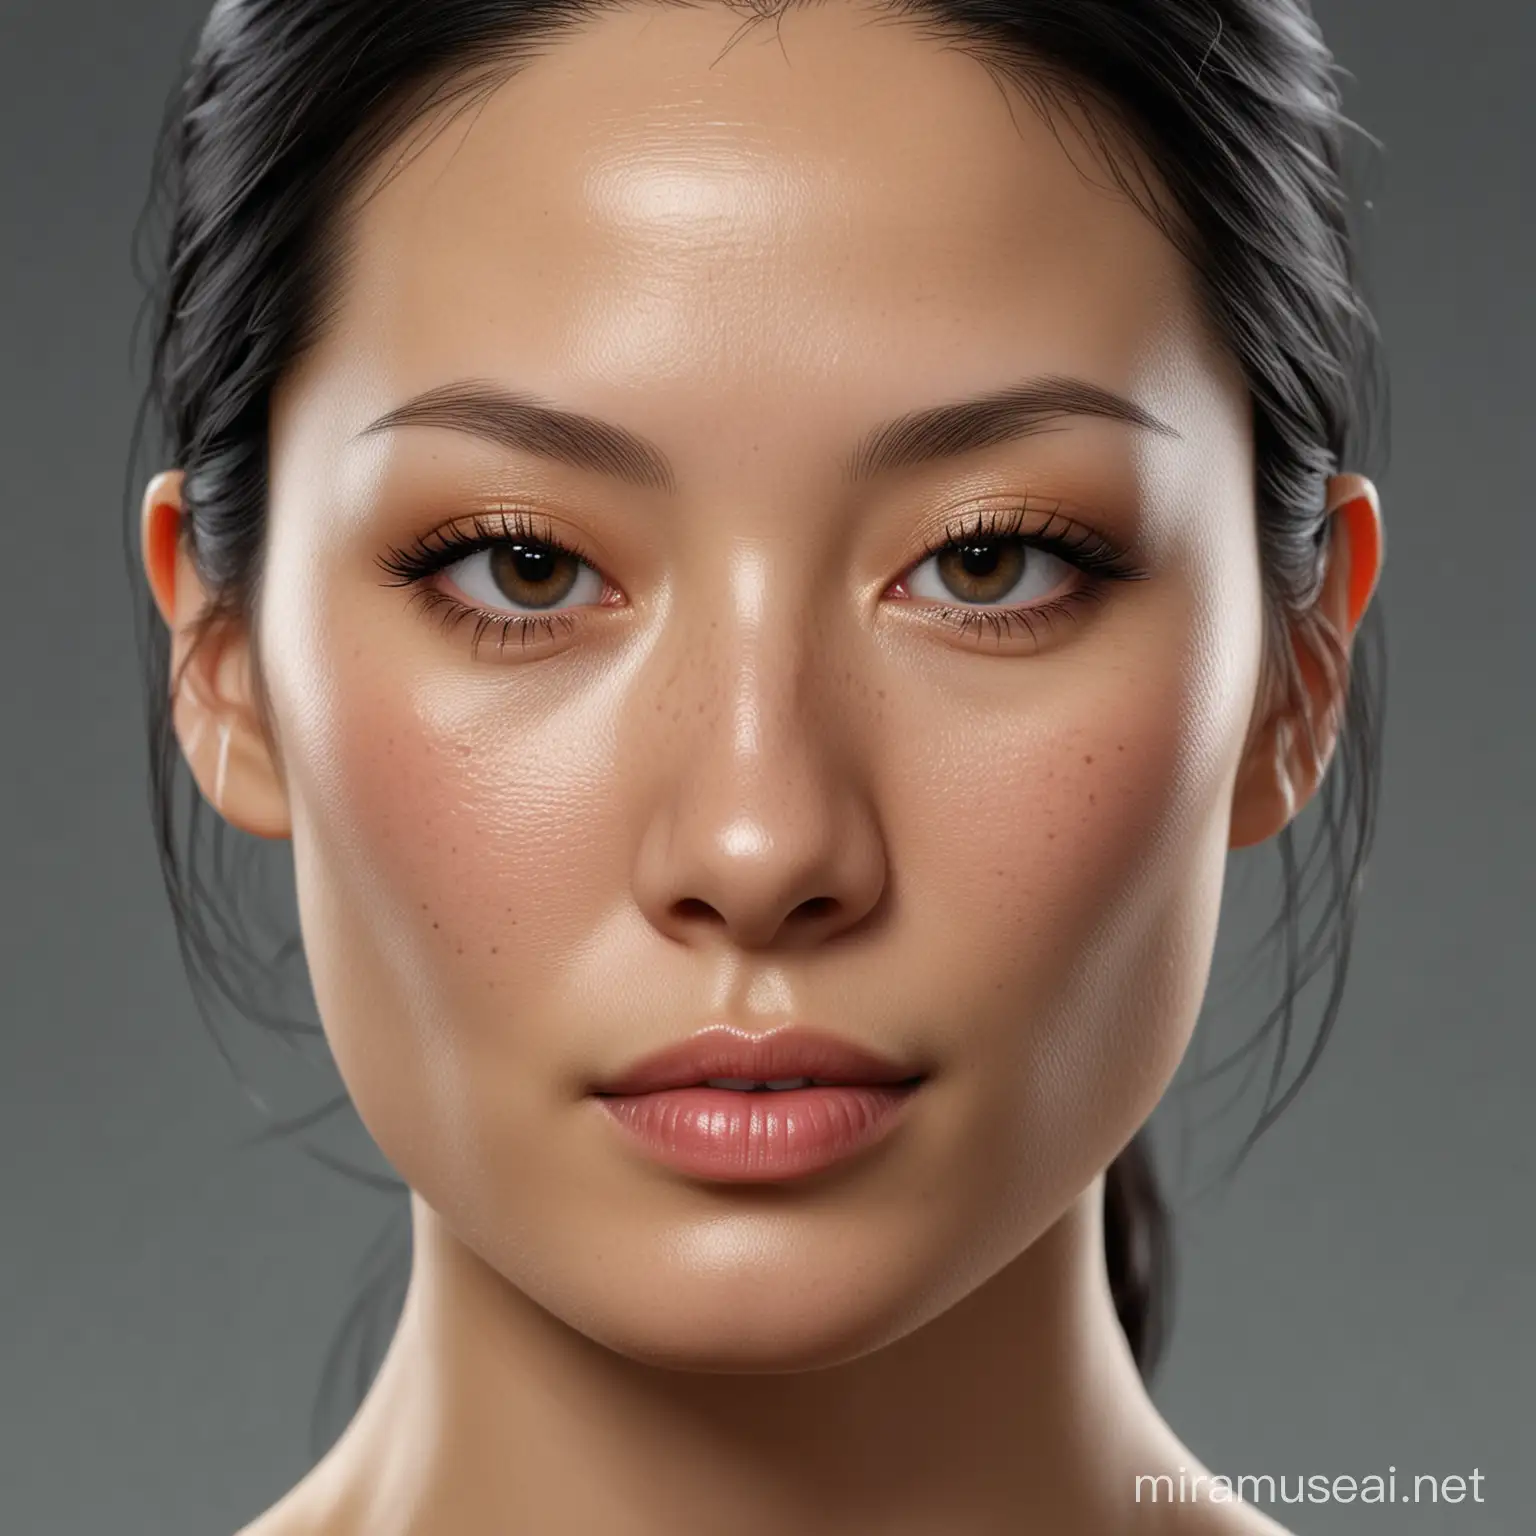 Asian Female Portrait with Enhanced Features Realistic and Dynamic Lucy Liu Inspired Artwork